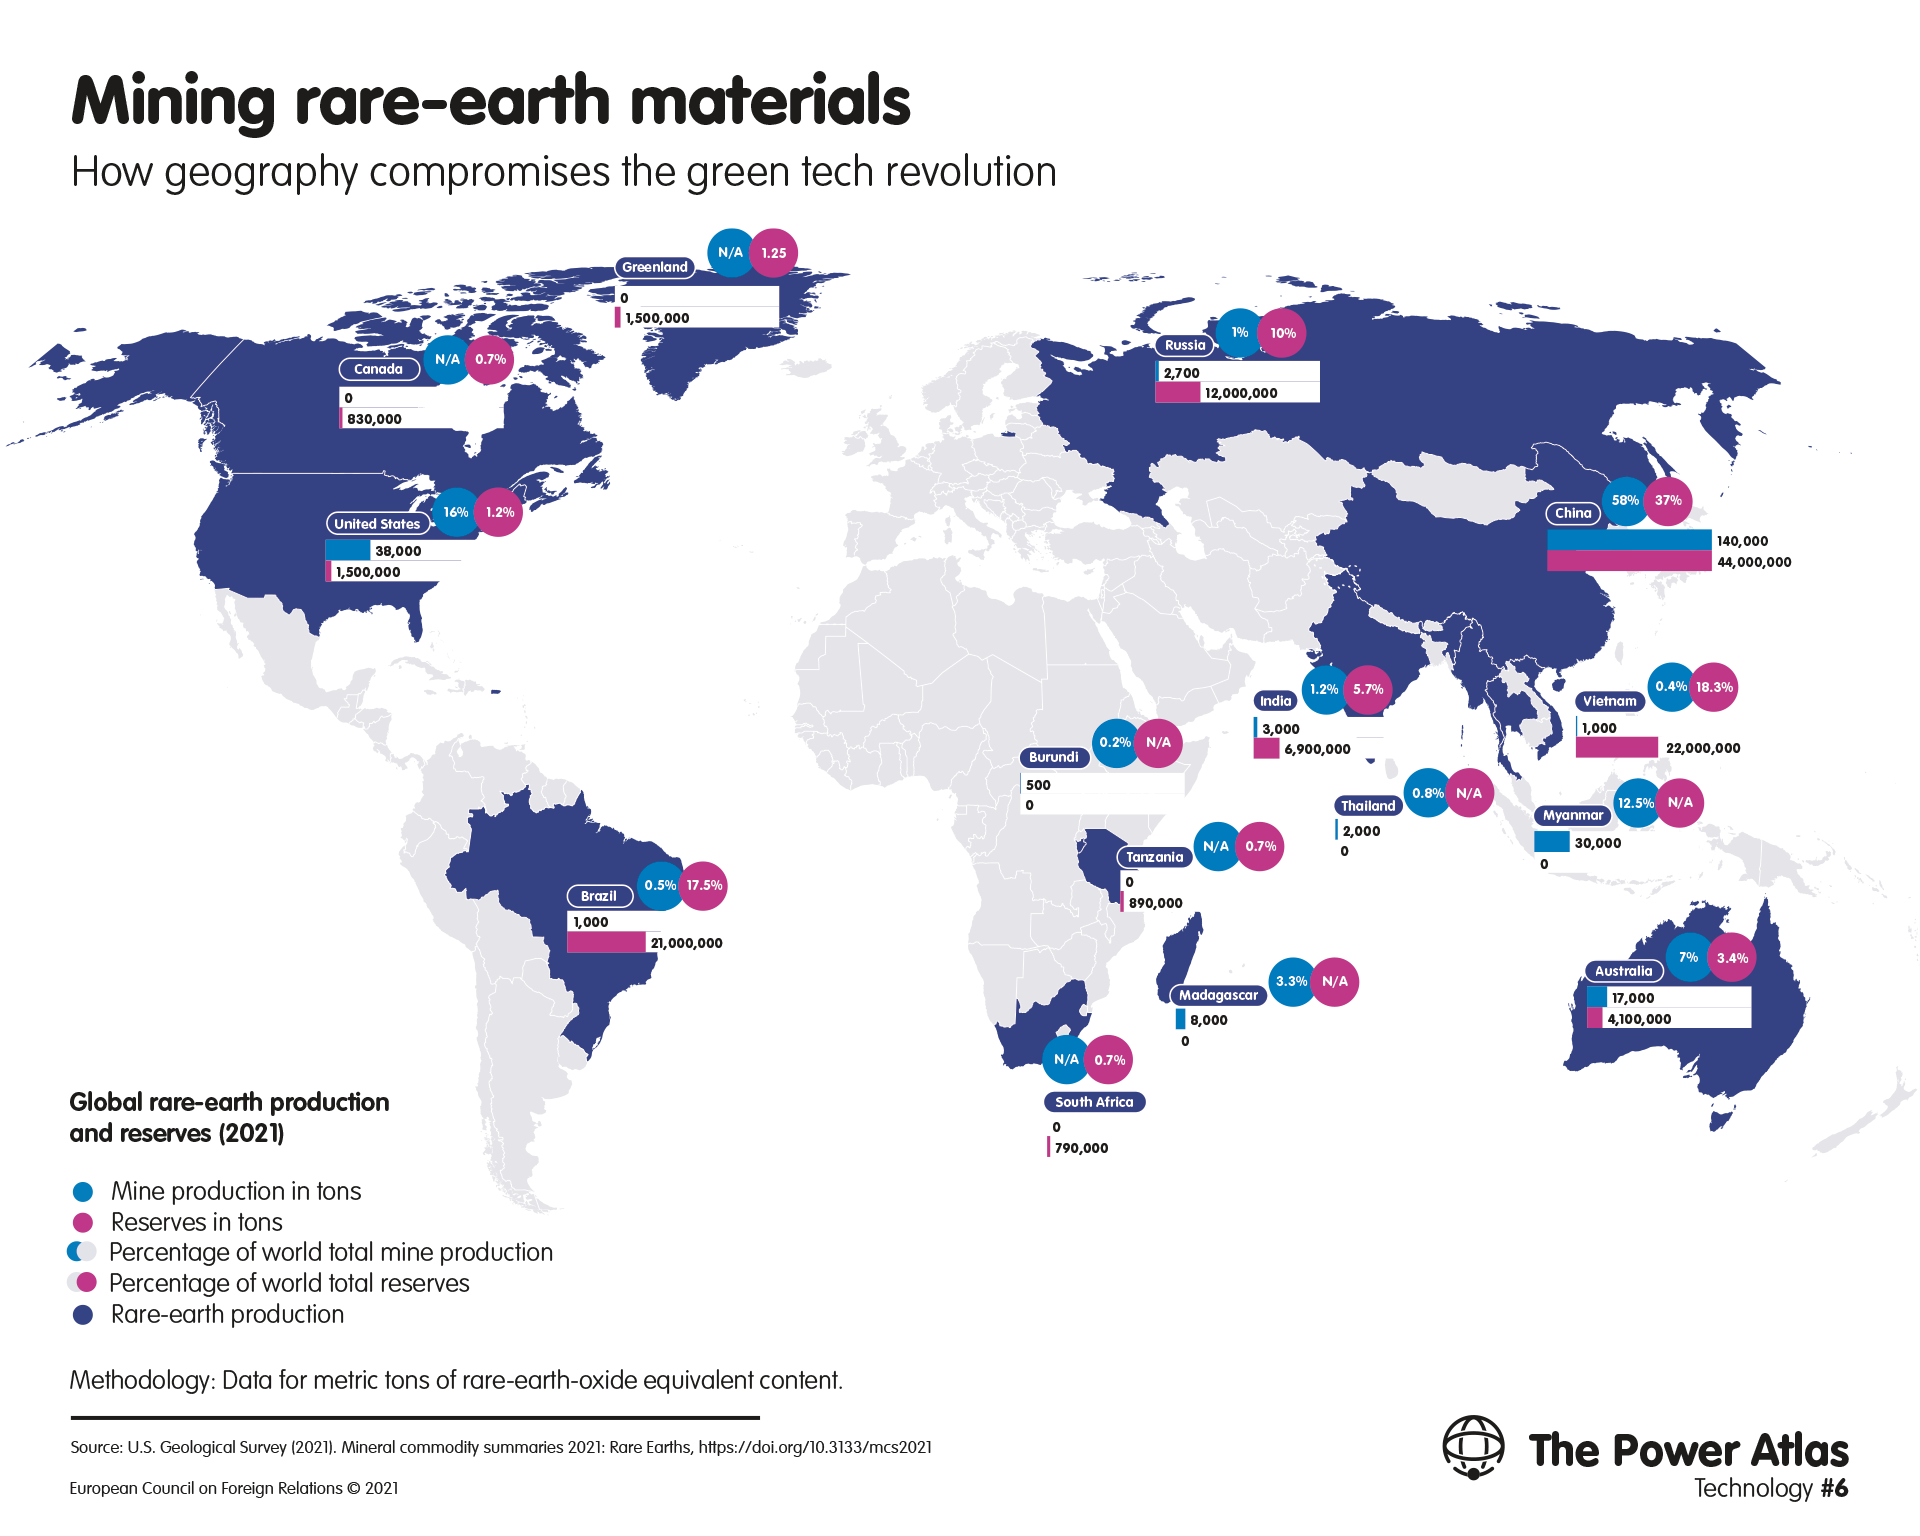 Mining rare-earth materials: How geography compromises the green tech revolution
